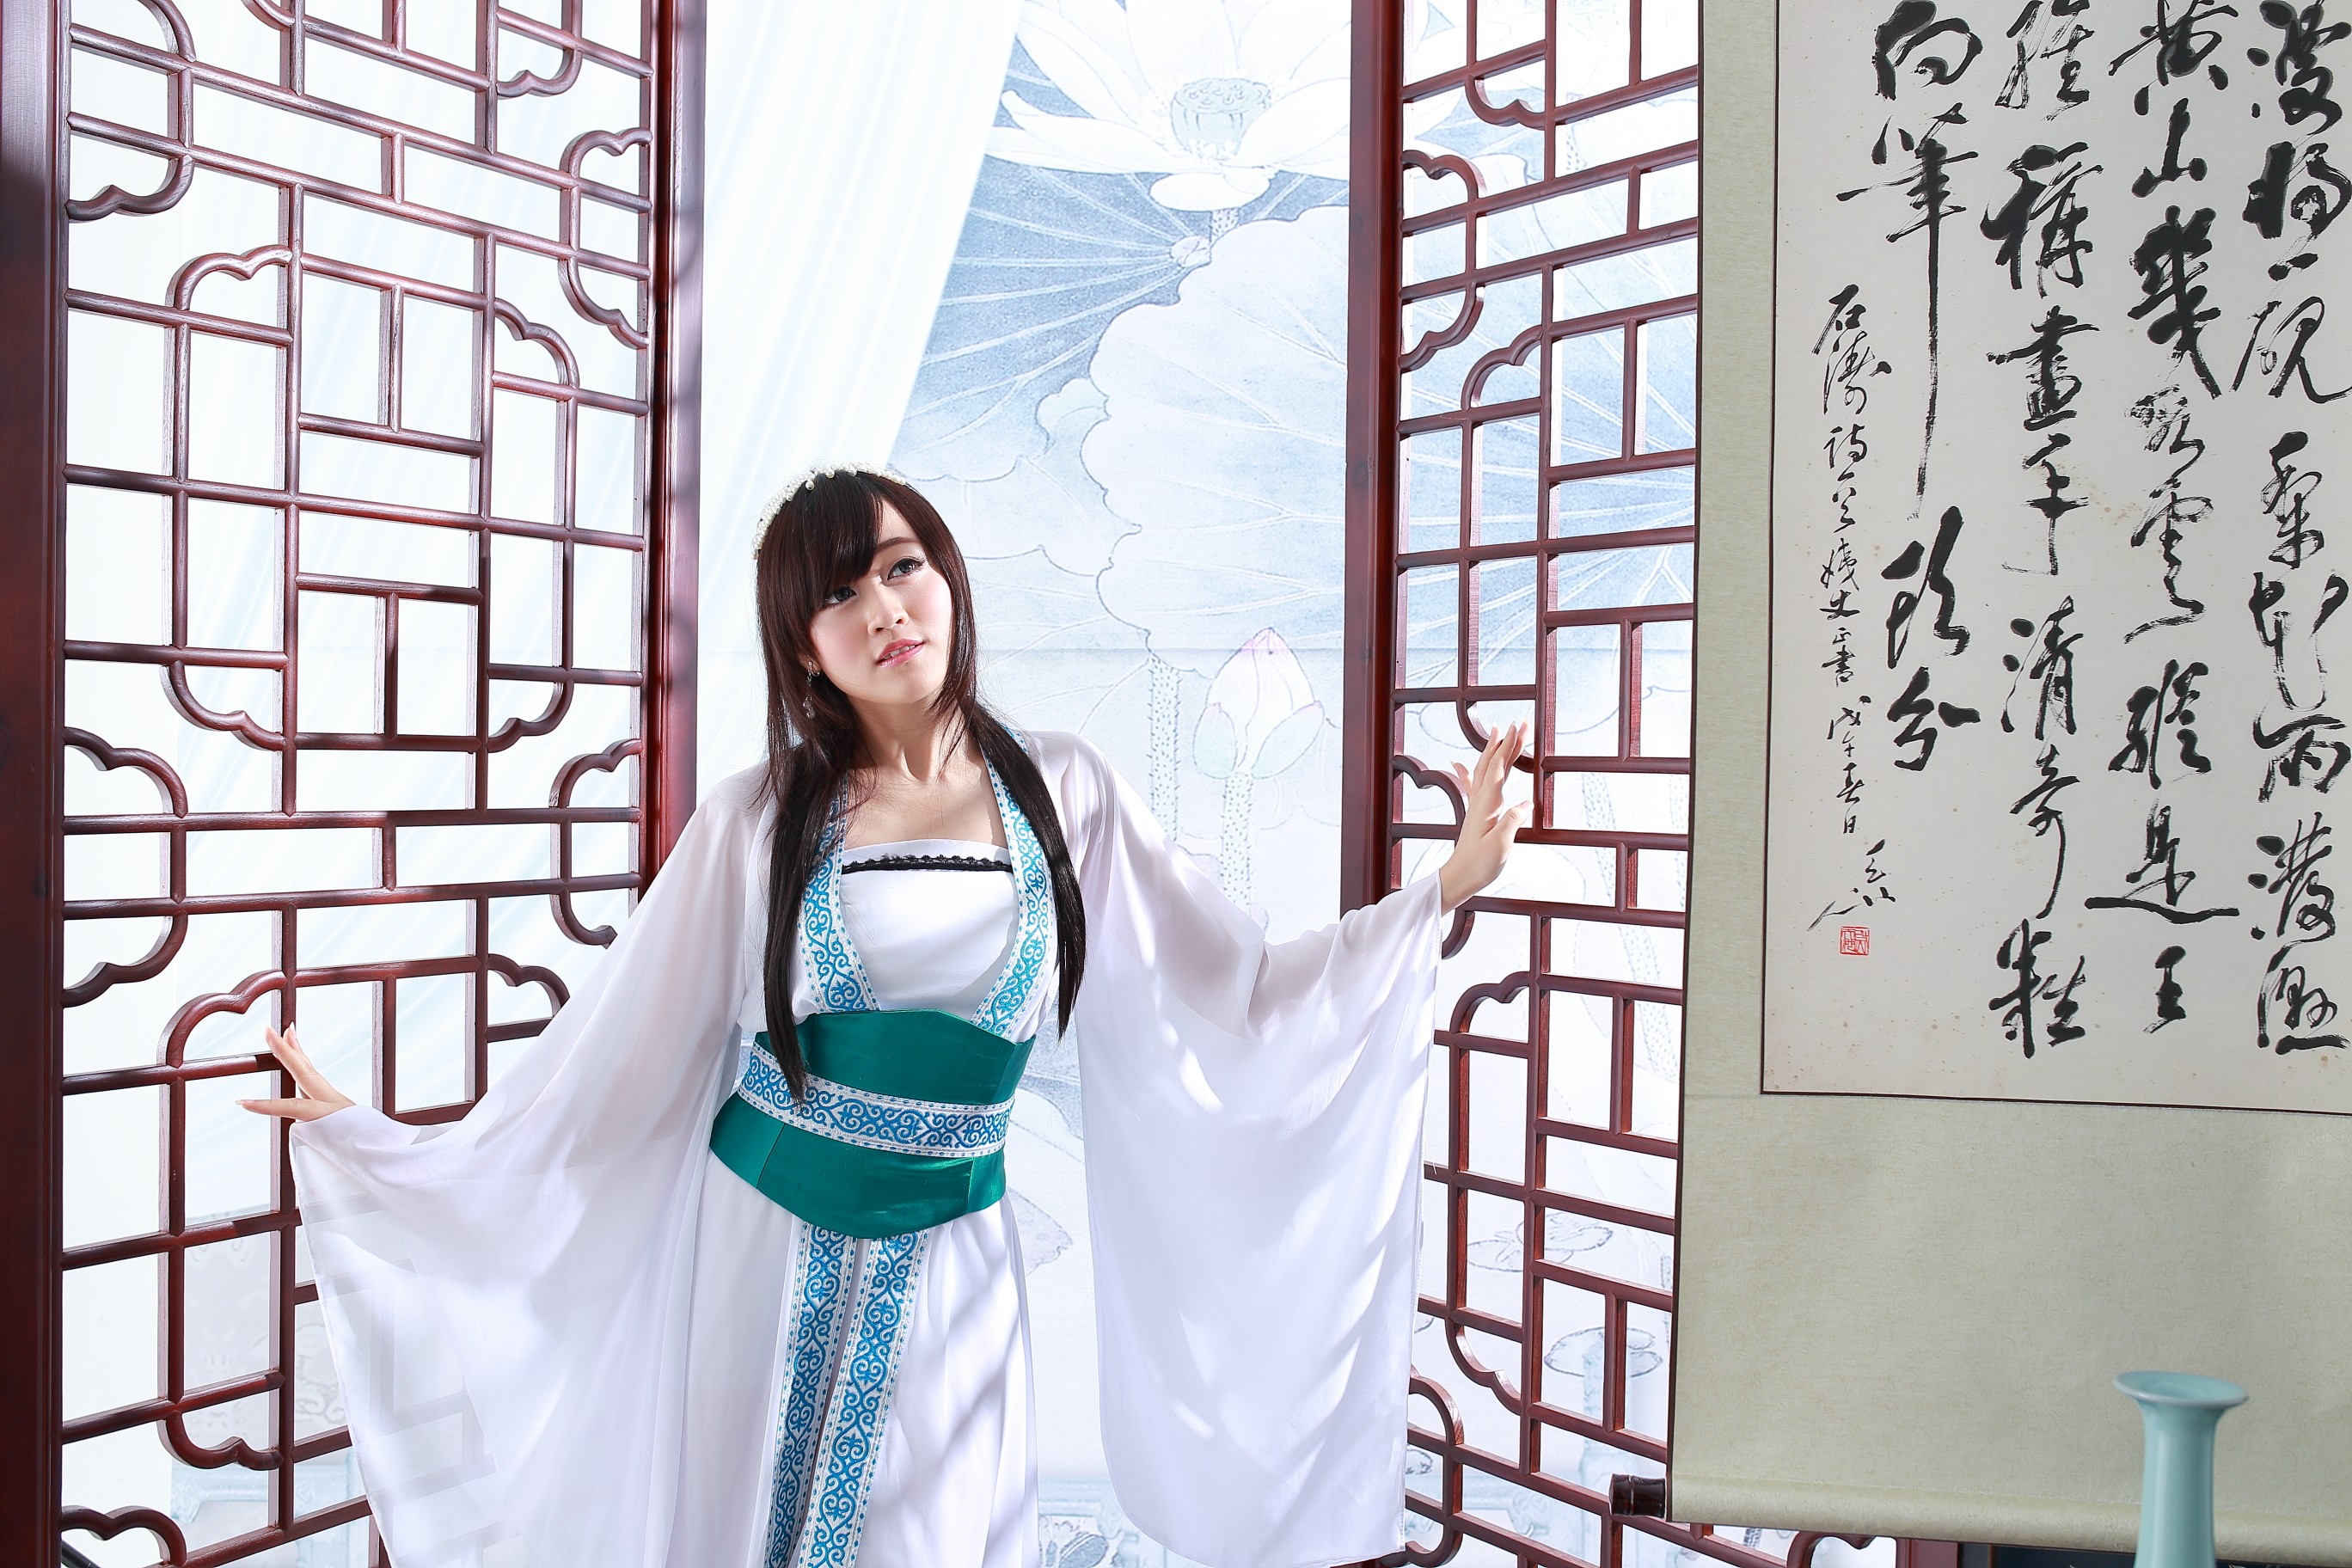 People 2736x1824 hanfu Chinese dress women Asian brunette traditional clothing model looking up Chinese women Chinese model women indoors